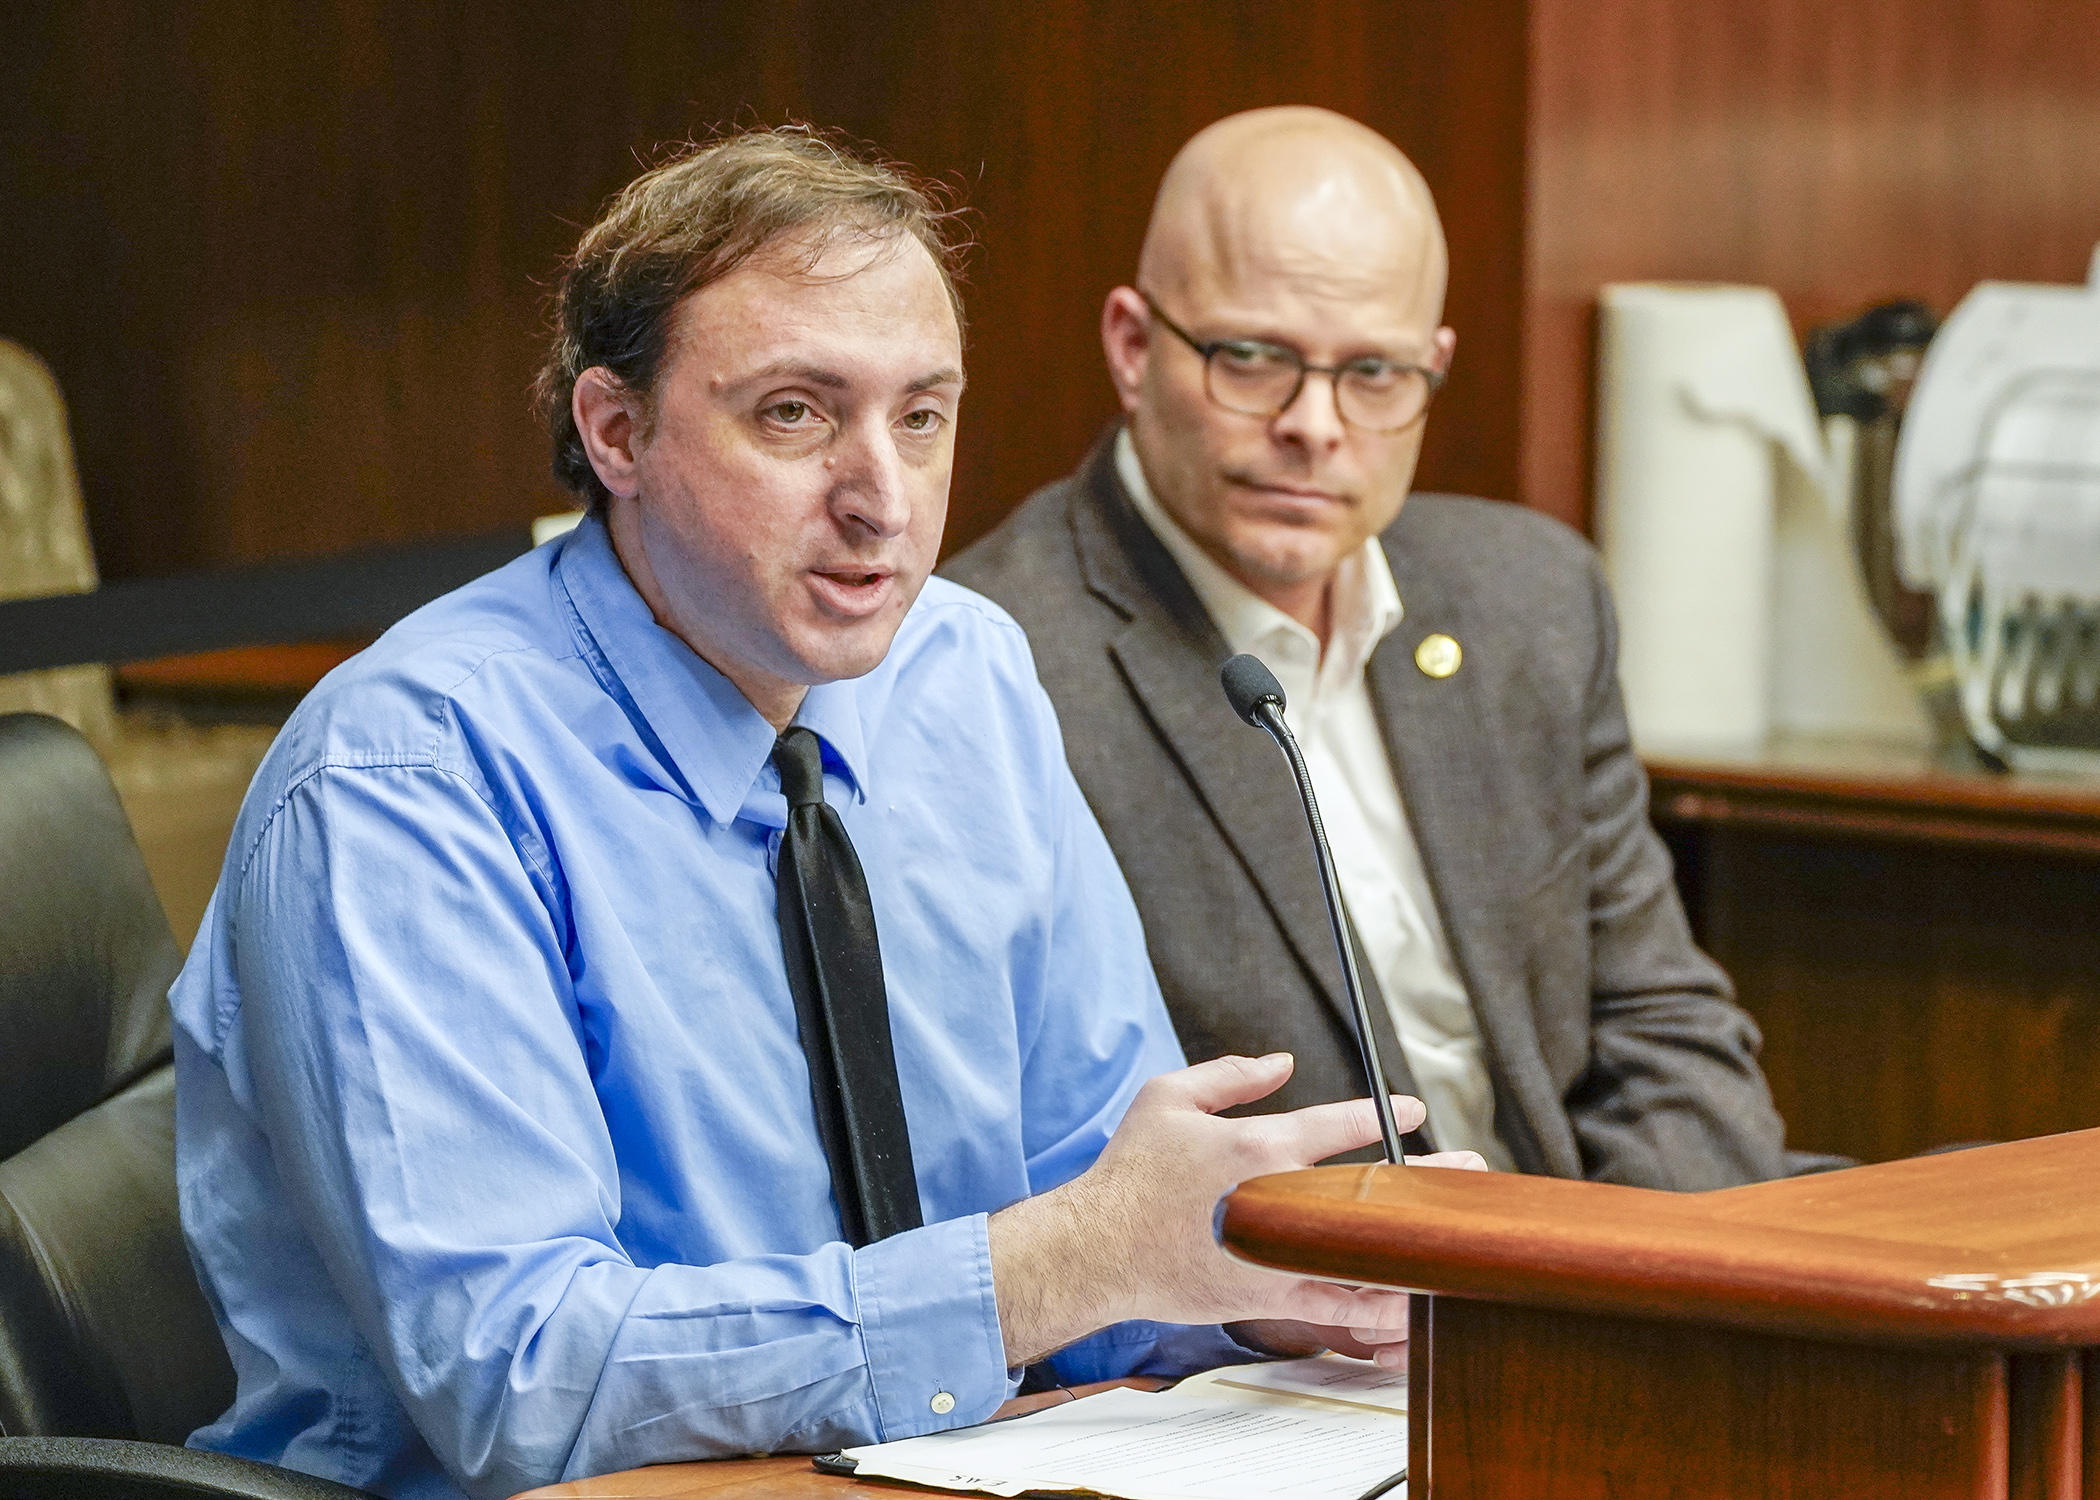 Otter Tail County Emergency Manager Patrick Waletzko testifies March 19 on a bill sponsored by Rep. Dave Lislegard, right, to establish a onetime aid program totaling more than $100 million for licensed ambulance services. (Photo by Andrew VonBank)